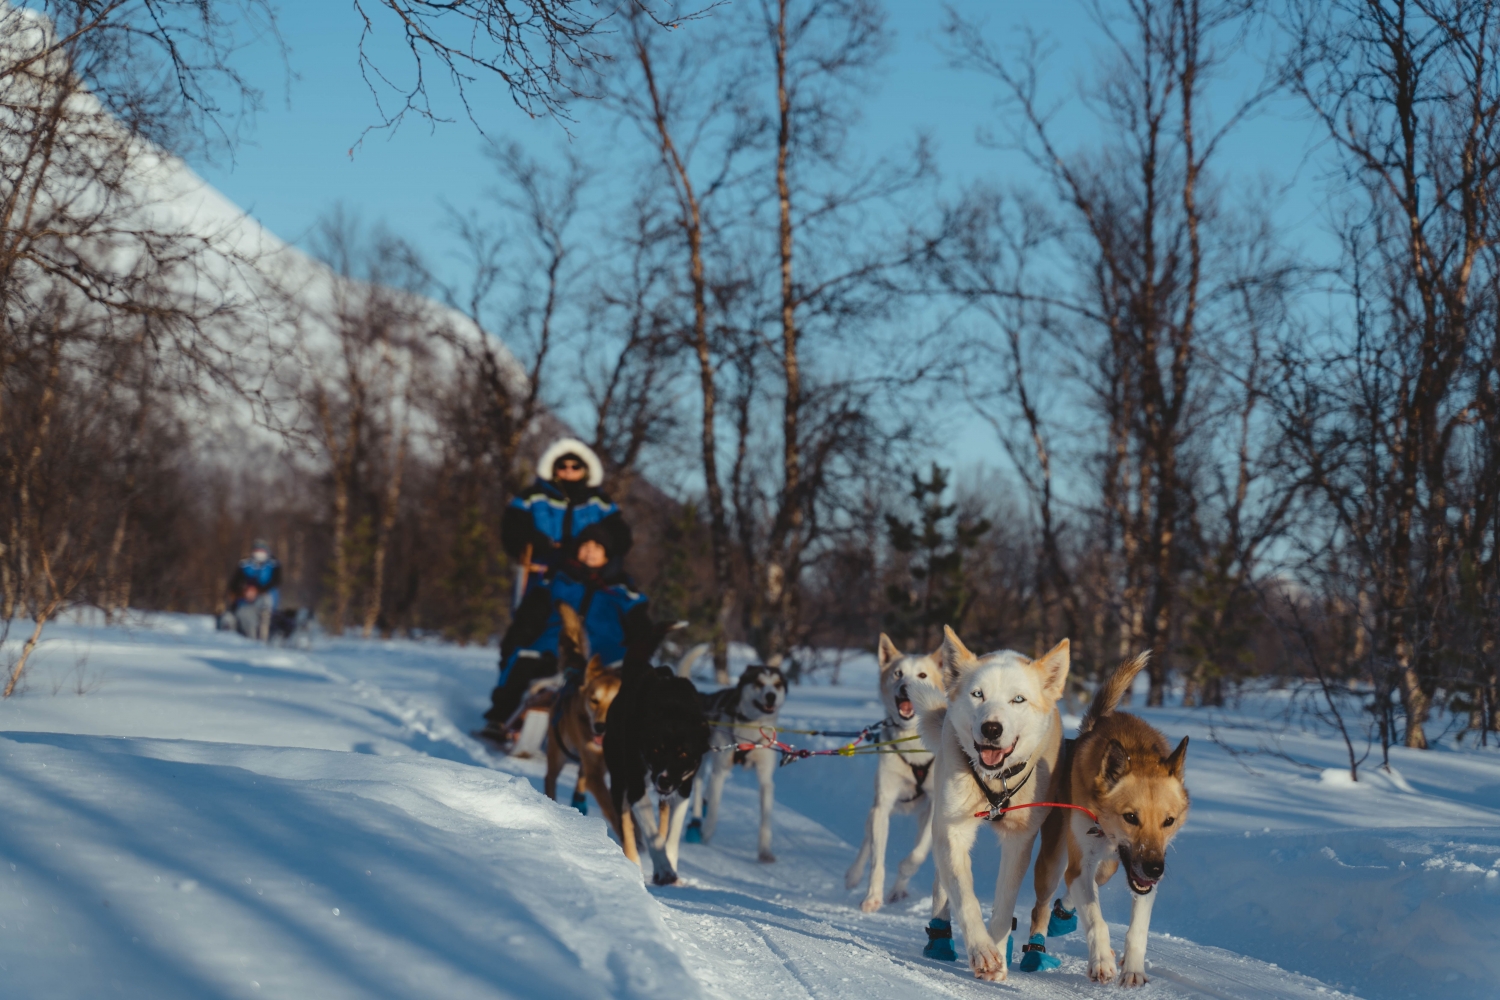 dog sledding. huskies pulling a sled with two people. another sled and huskies in the background